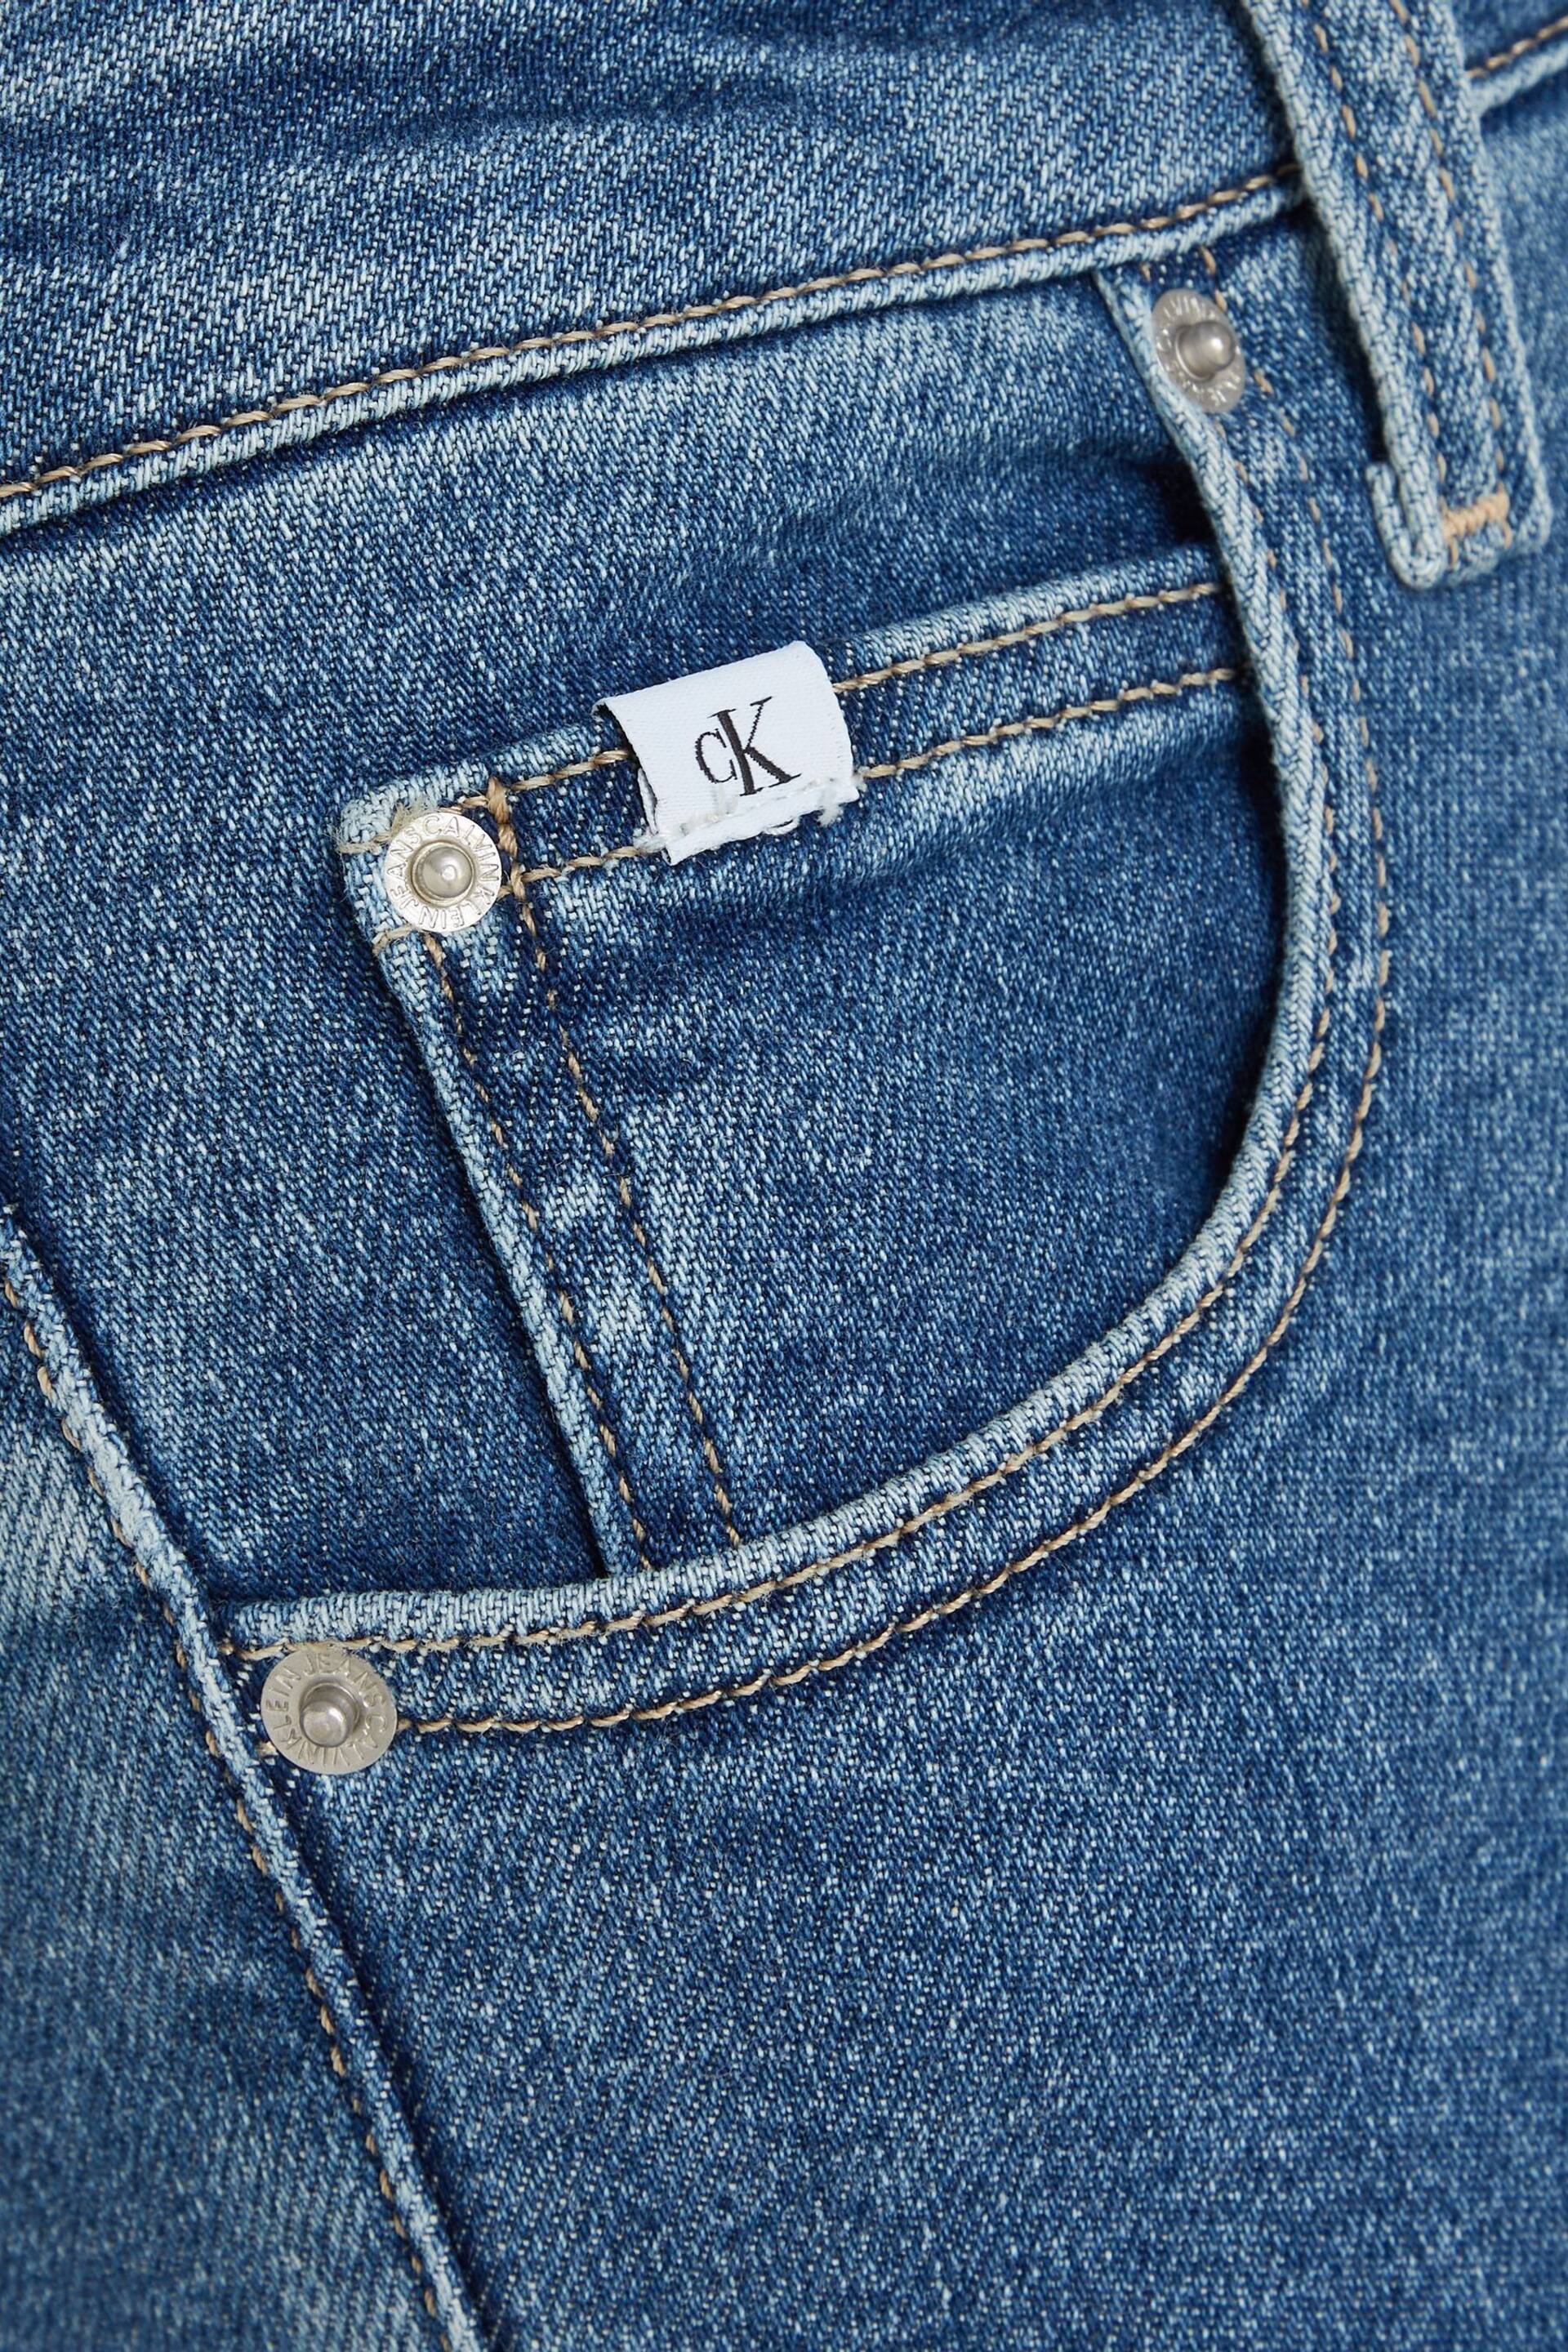 Calvin Klein Jeans High Rise Skinny Jeans - Image 6 of 6